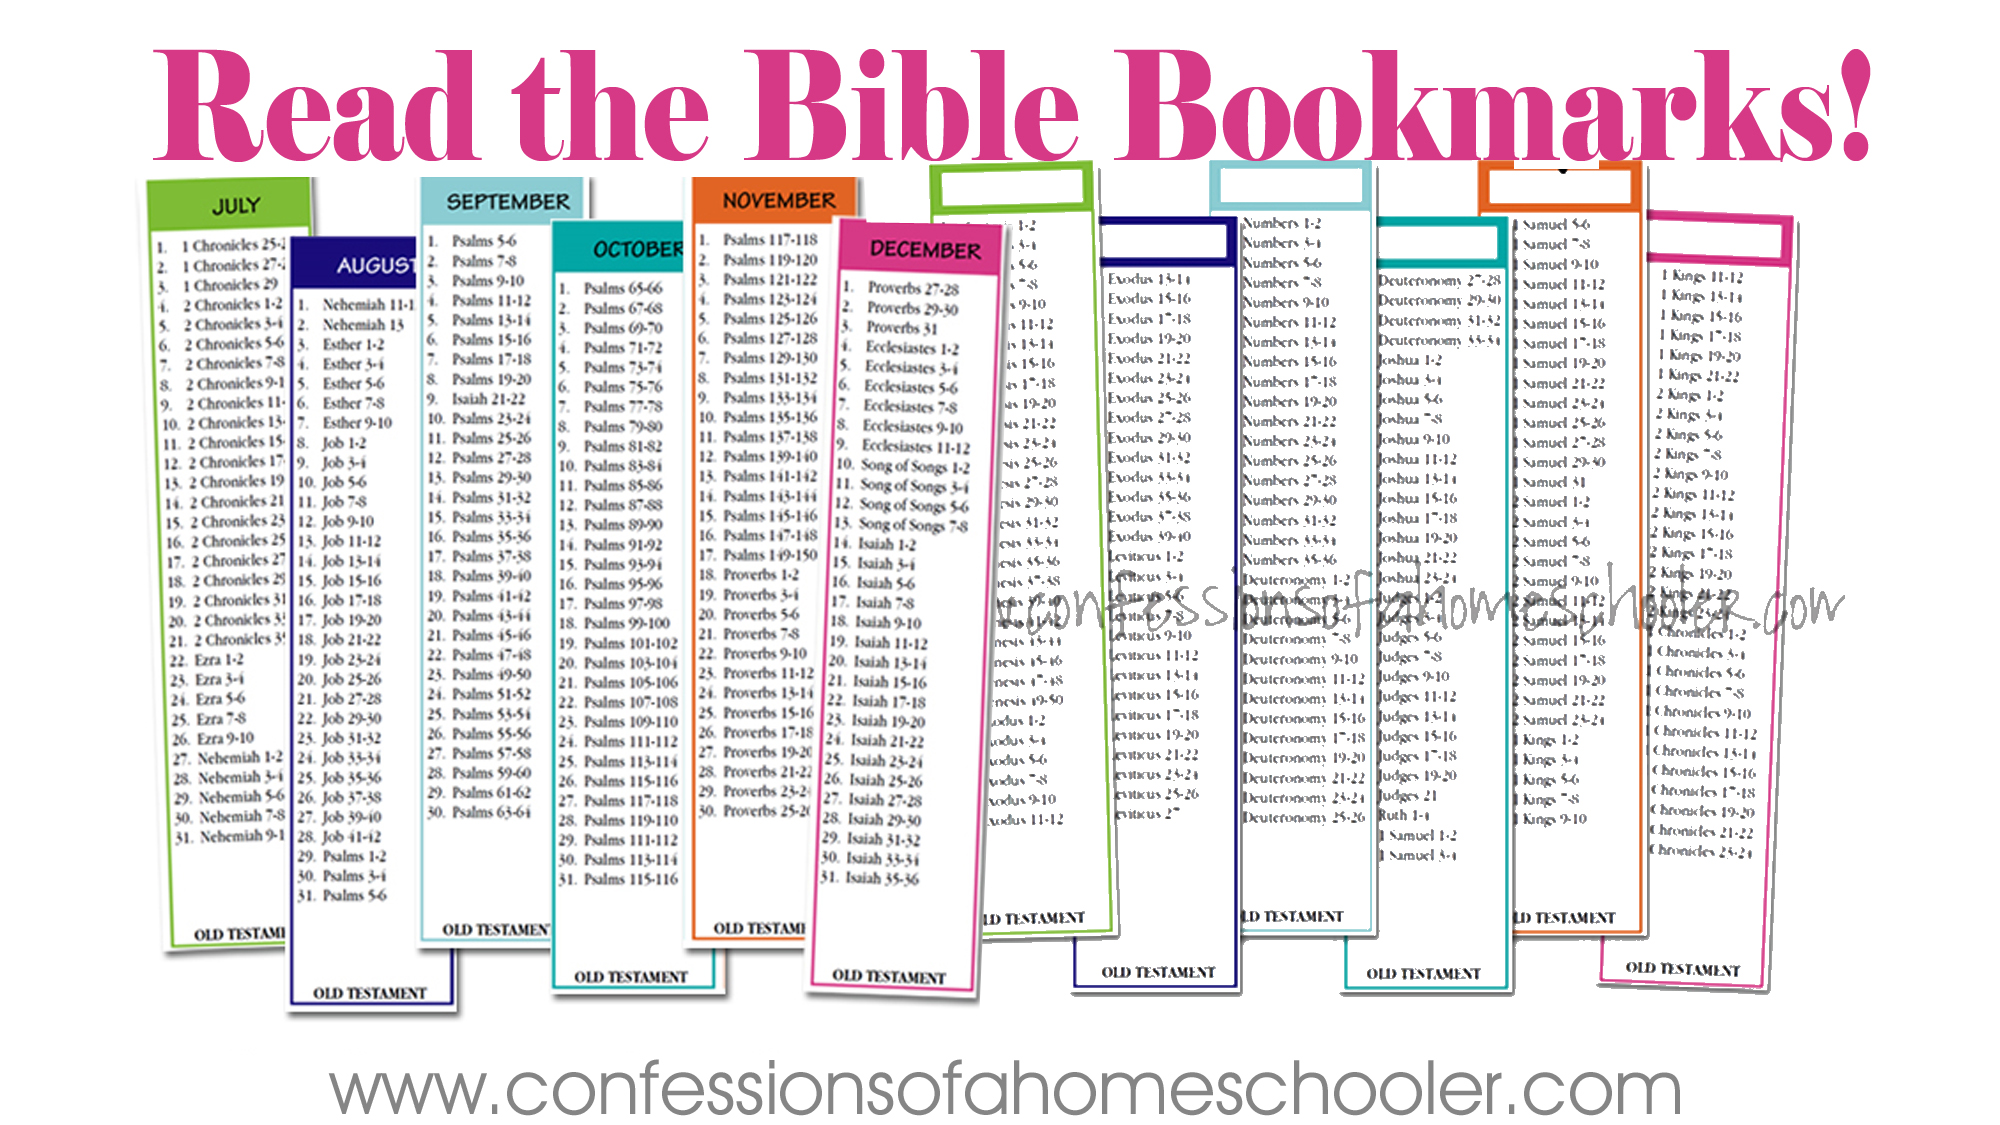 read-the-bible-in-two-years-bookmarks-confessions-of-a-homeschooler